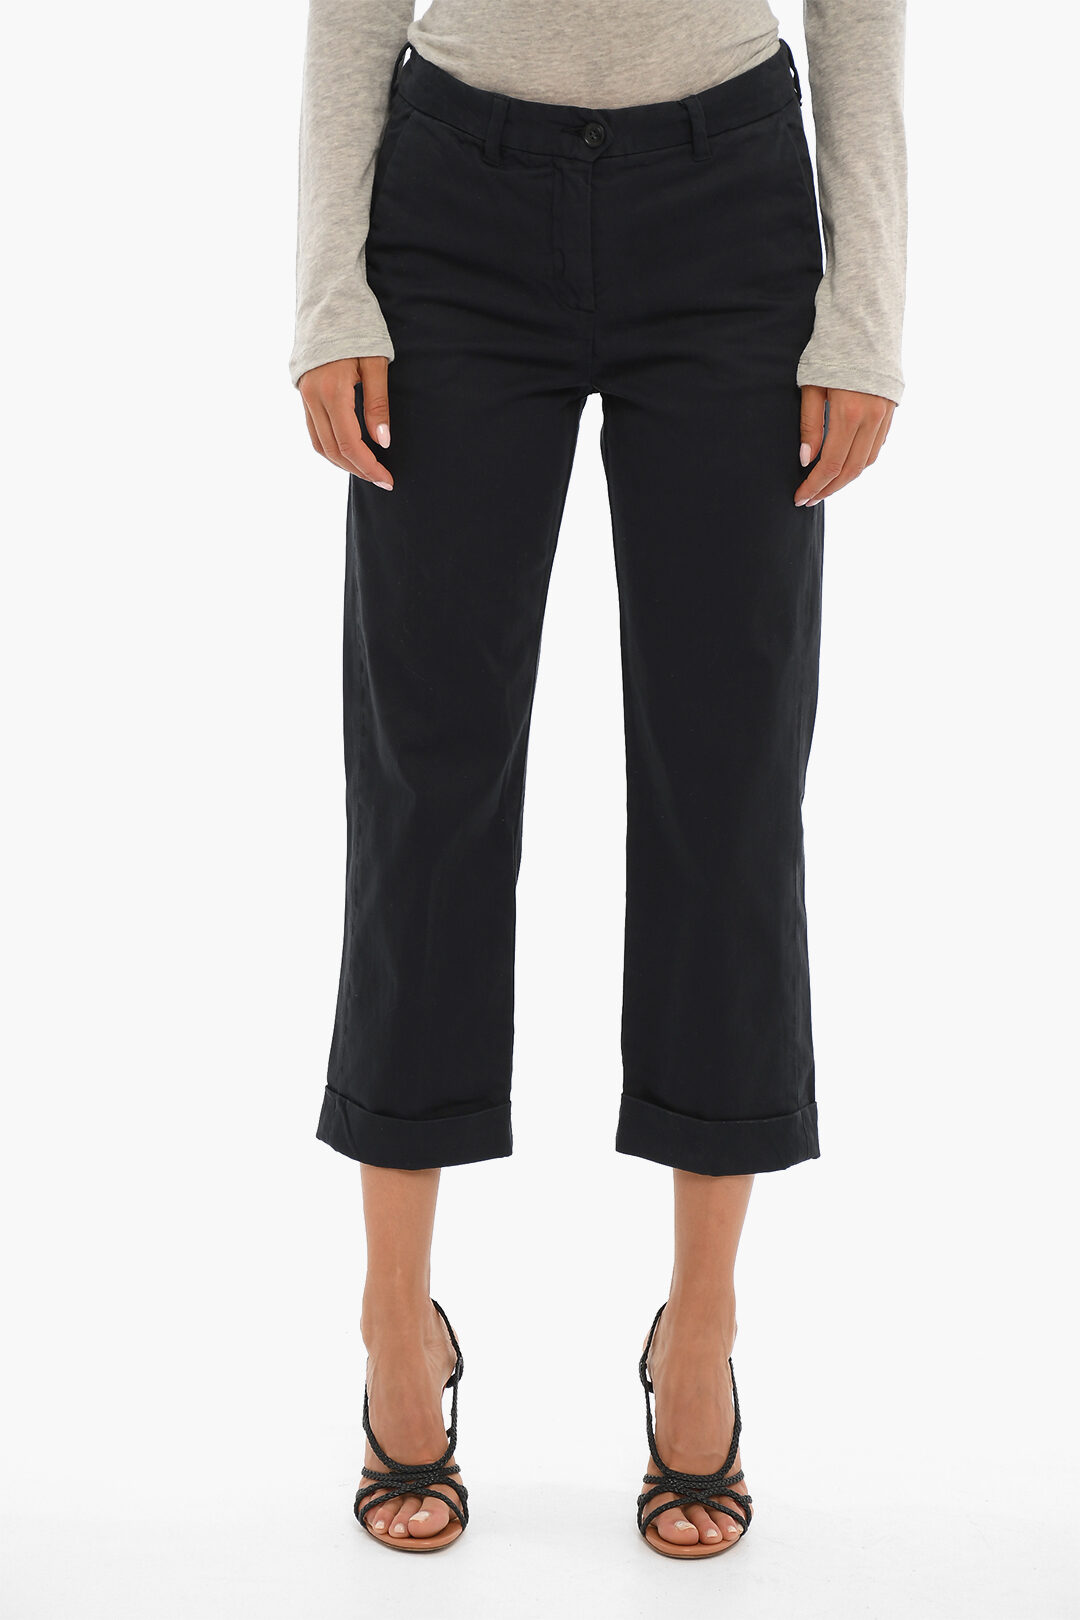 Woolrich Cotton Stretch AMERICAN Pants with Belt Loops women - Glamood  Outlet